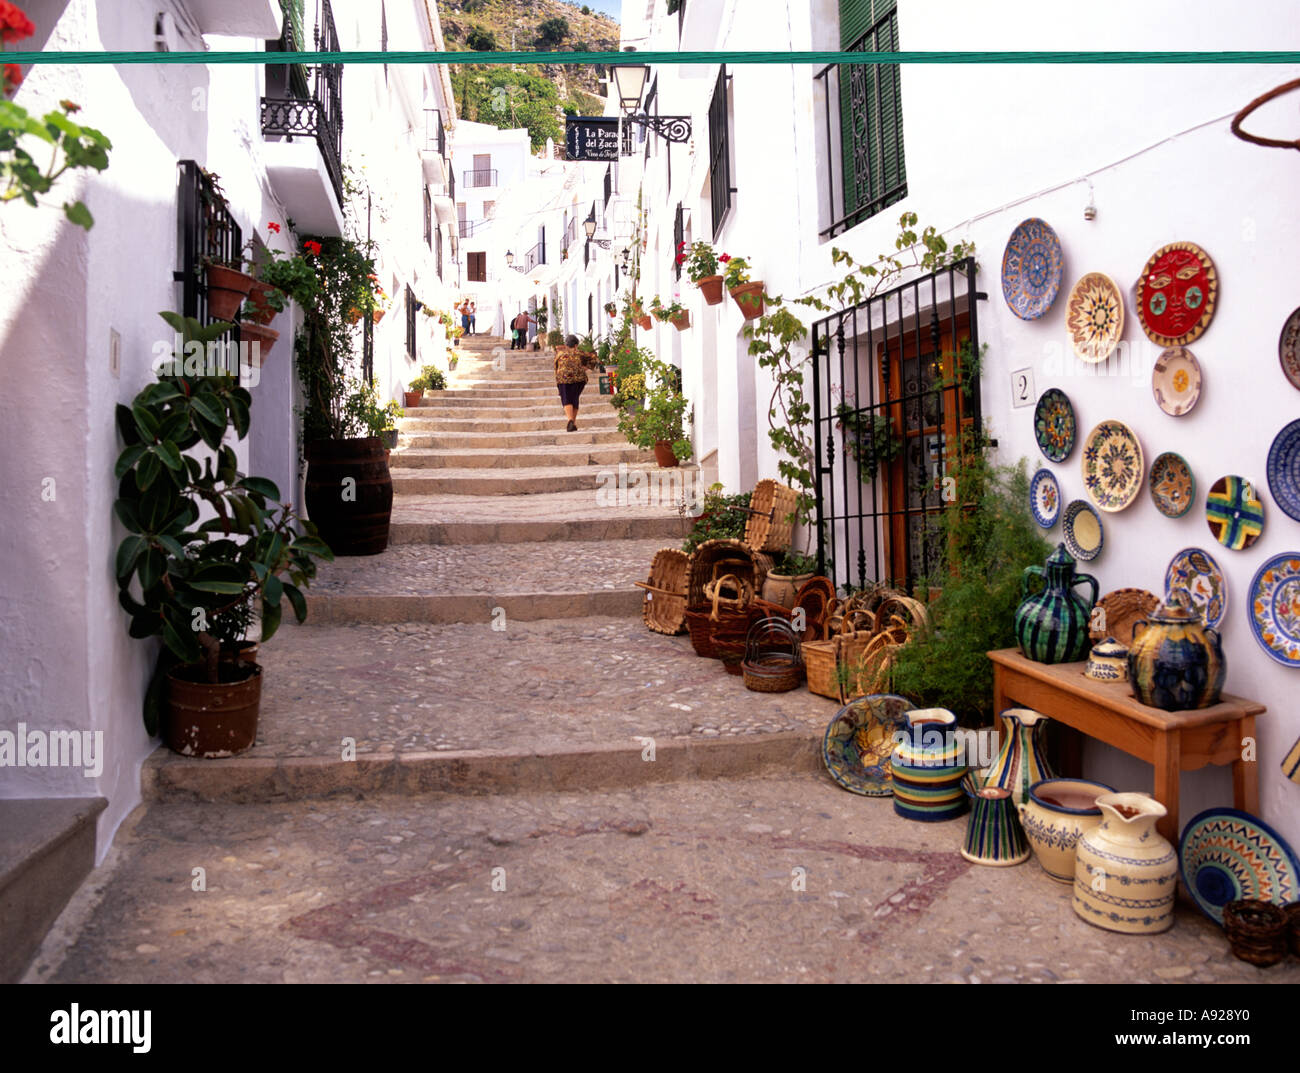 A street of steps in the picturesque white town of Frigiliana, near Nerja, Malaga, southern Spain Stock Photo